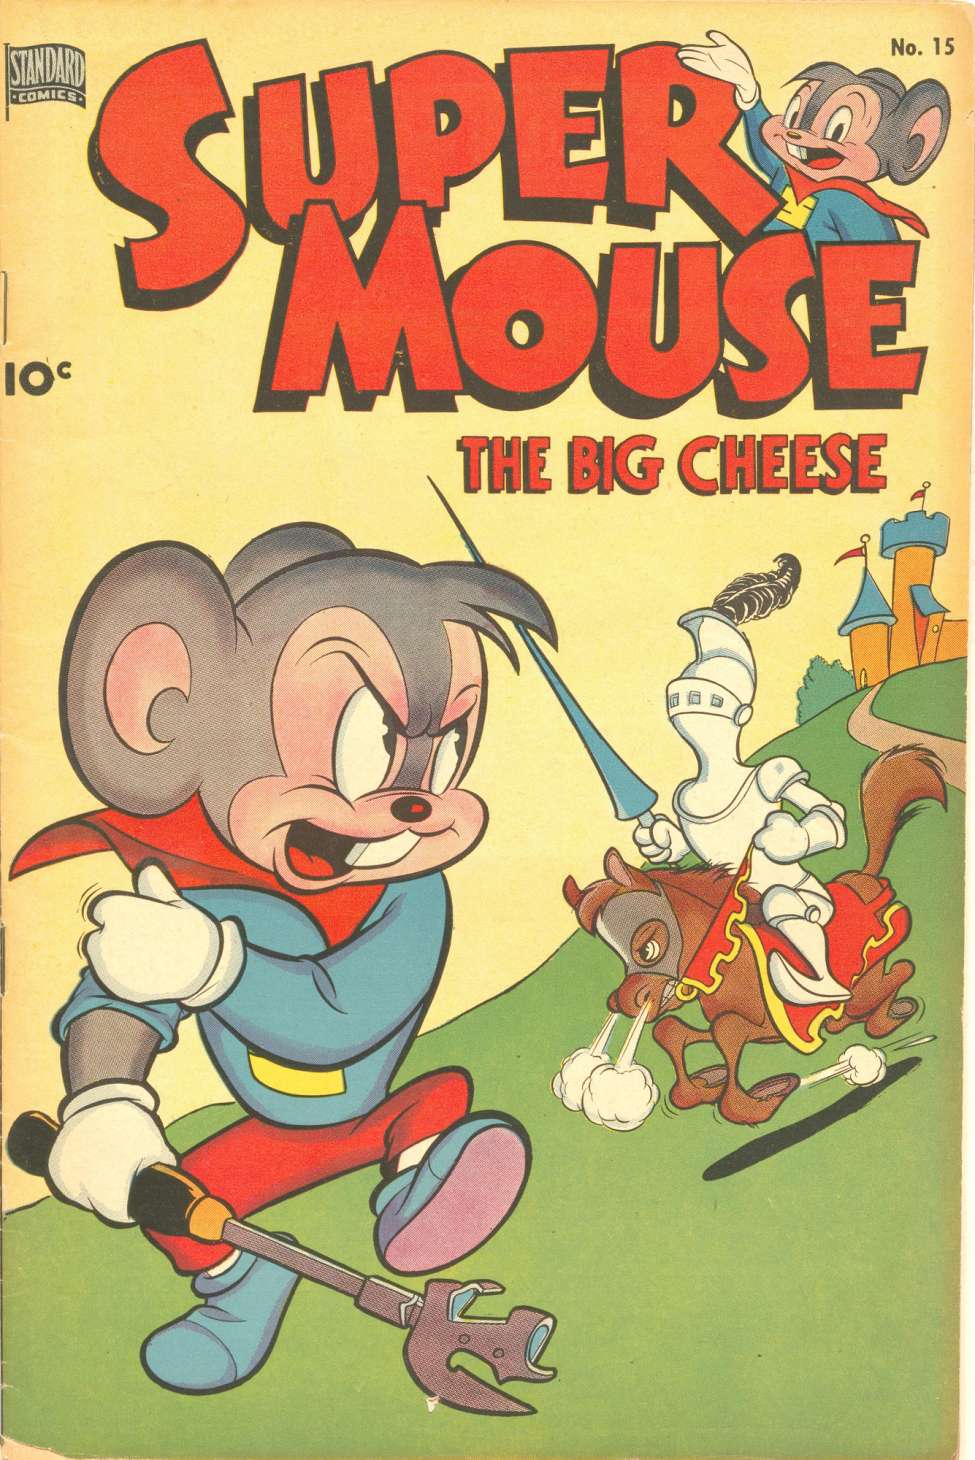 Book Cover For Supermouse 15 - Version 2